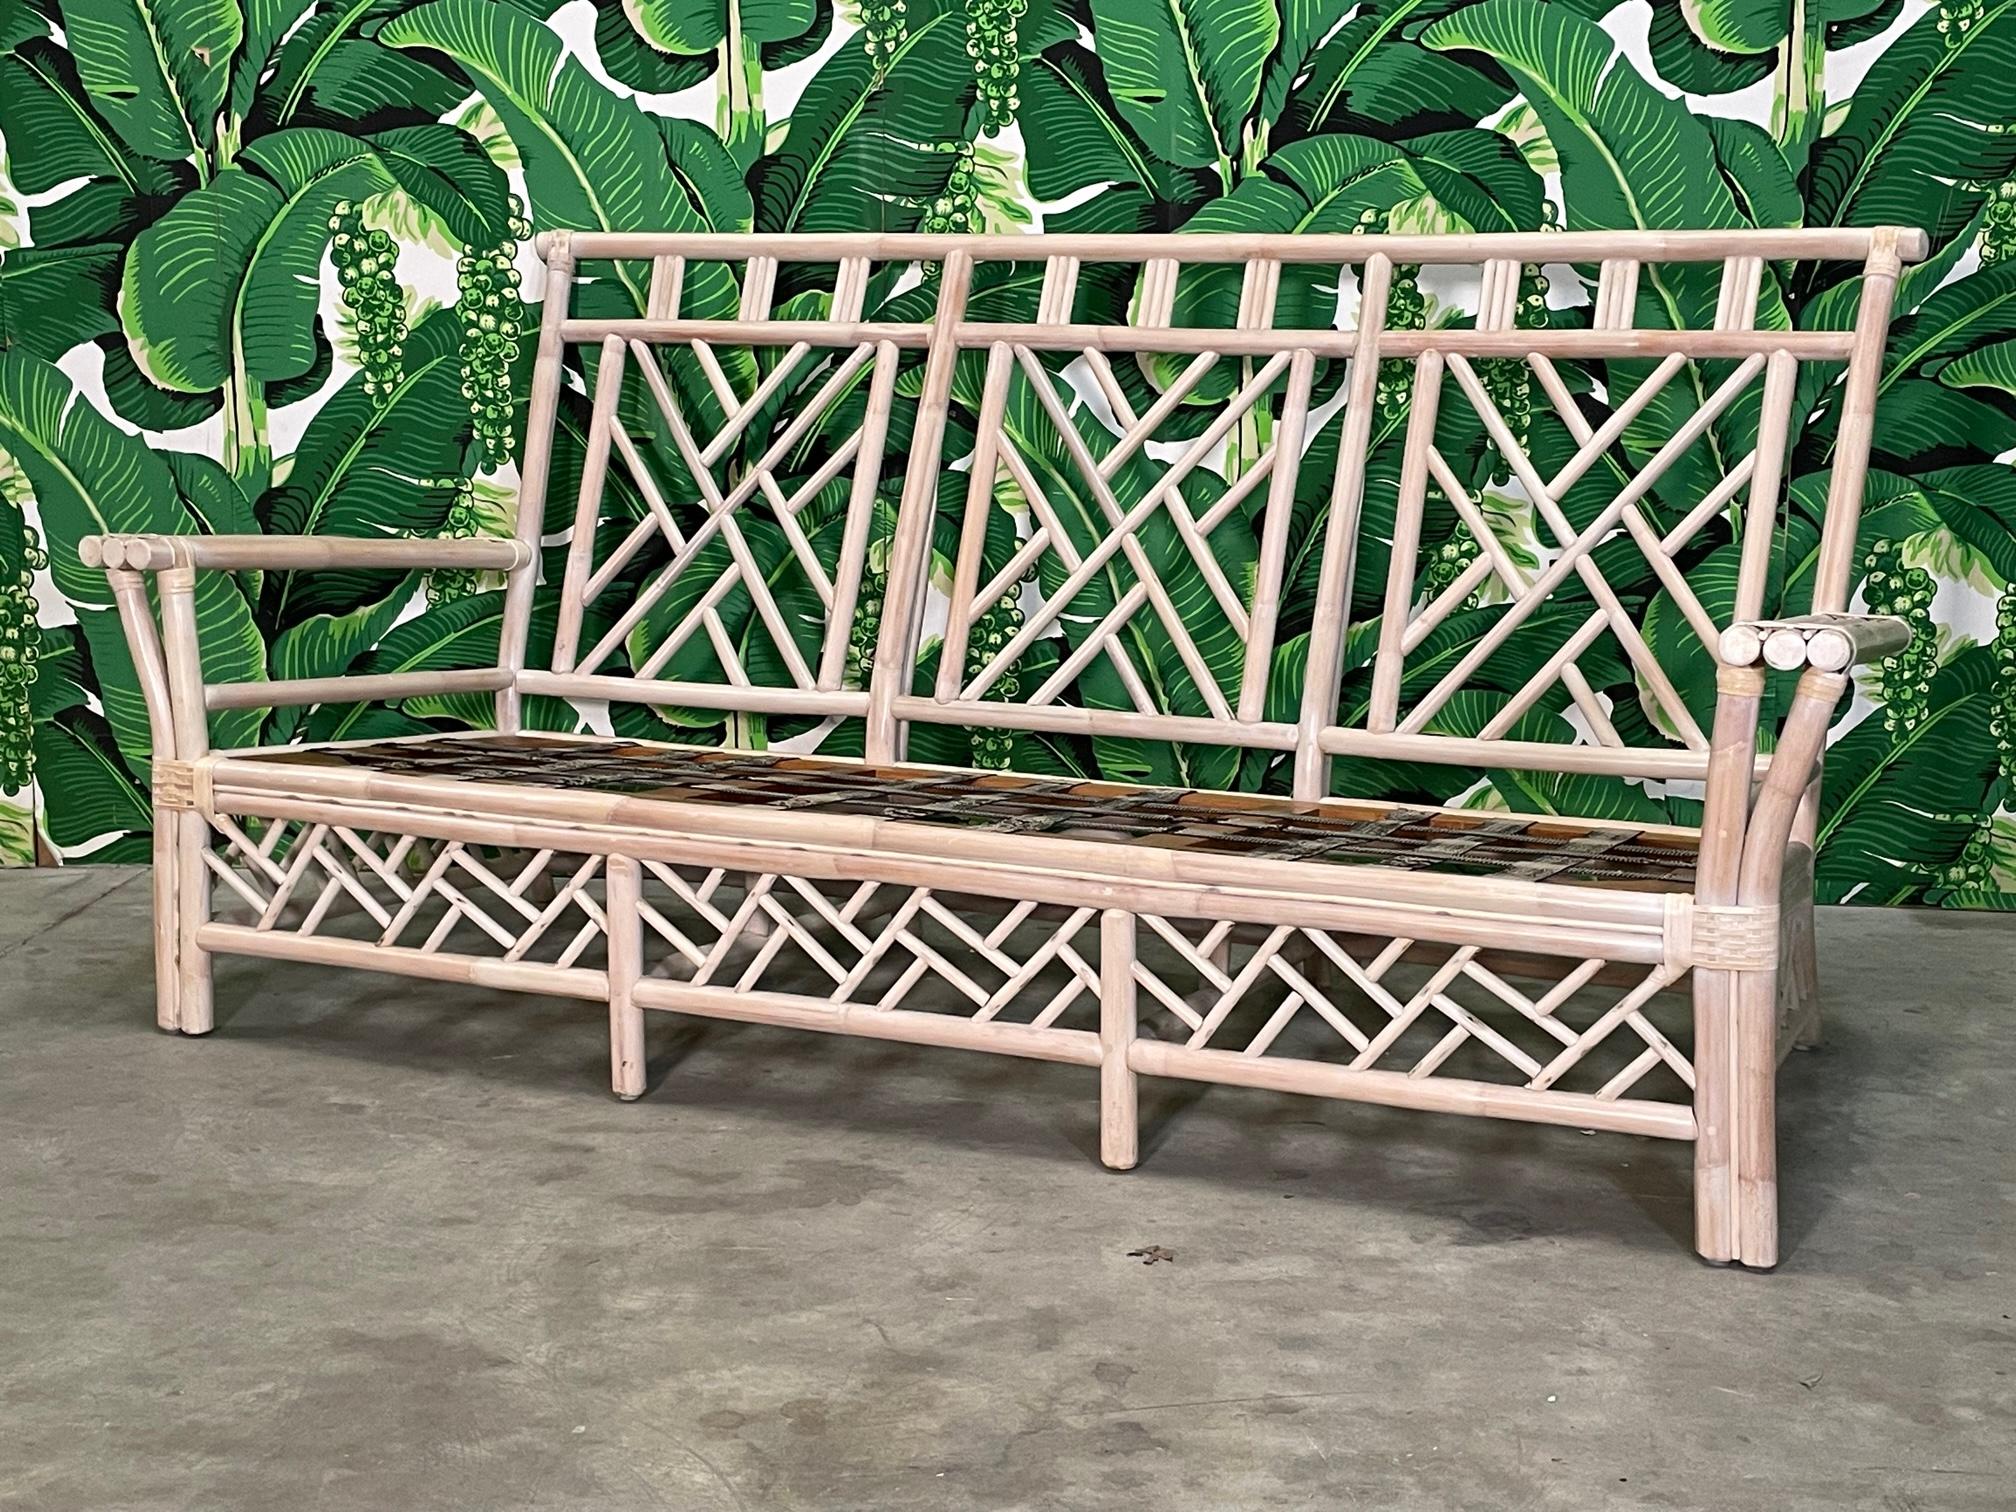 Rattan sofa features fretwork in the Chinese Chippendale style, perfect to complete your chinoiserie look. Good condition with minor imperfections consistent with age. May exhibit scuffs, marks, or wear, see photos for details. Includes seat and